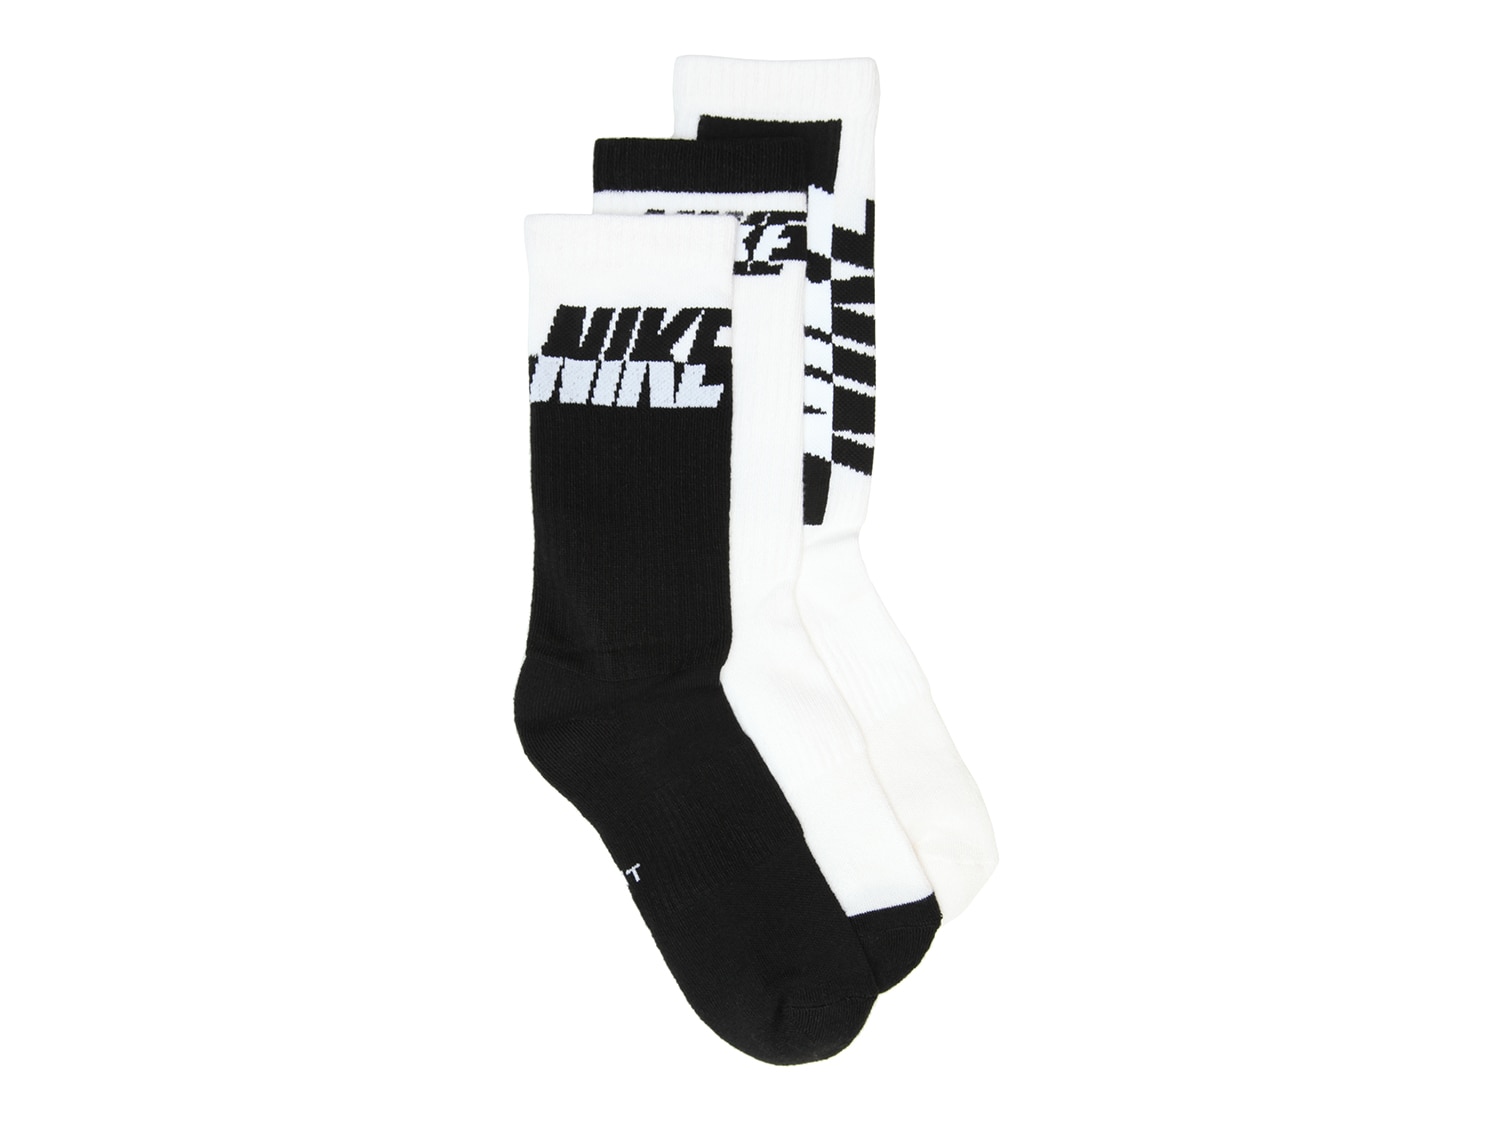 Nike Cotton Cushioned Kids' Crew Socks - 3 Pack - Free Shipping | DSW